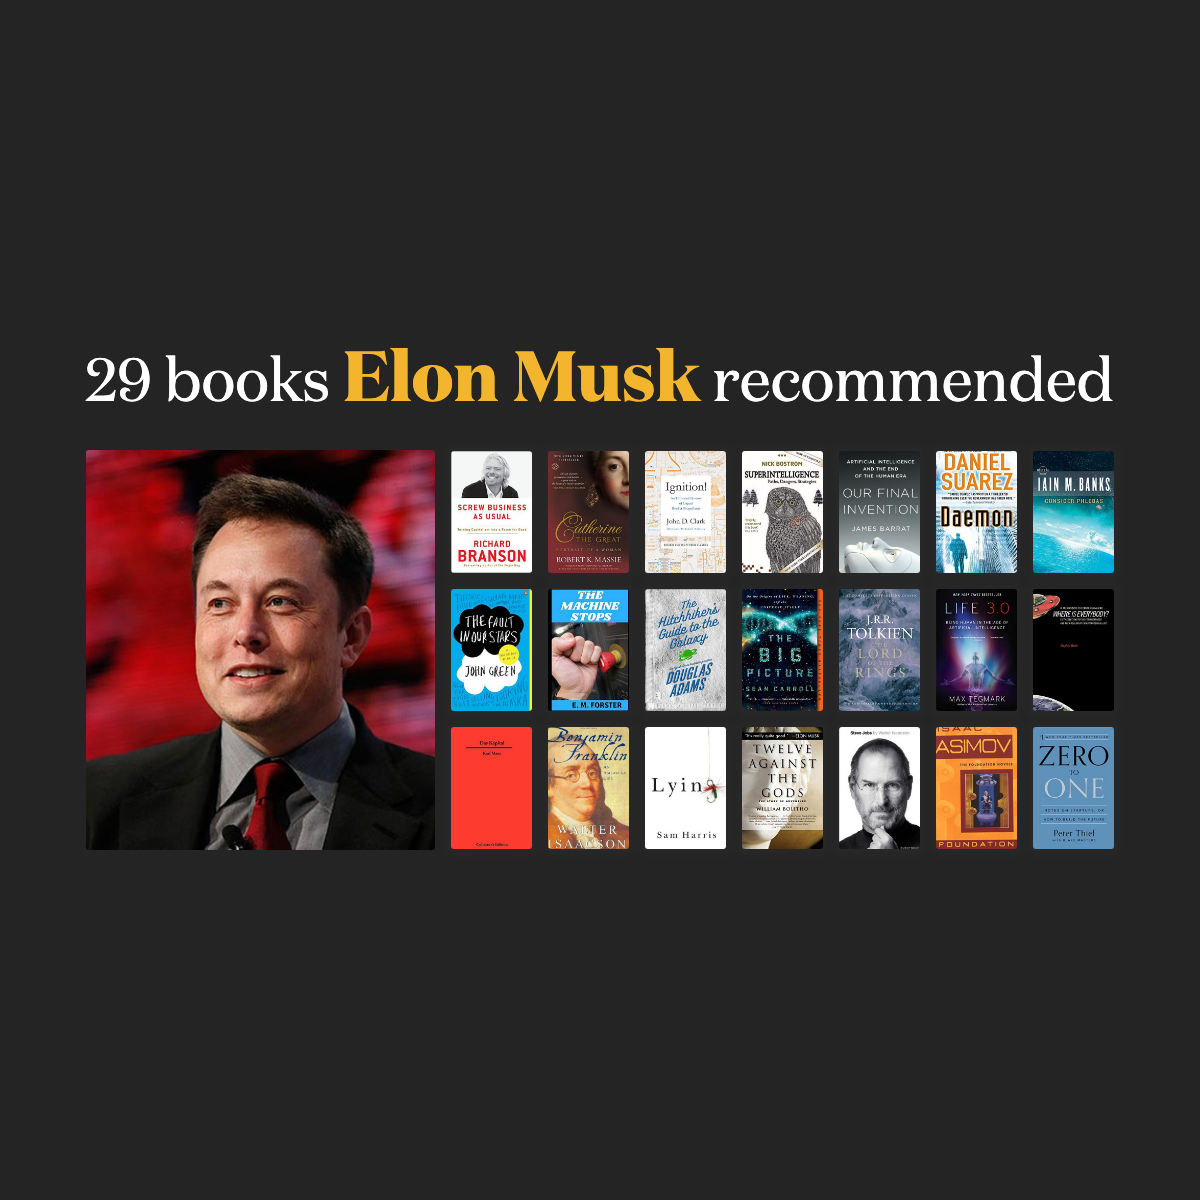 10 Books Recommended By Elon Musk / Books recommended by Elon Musk